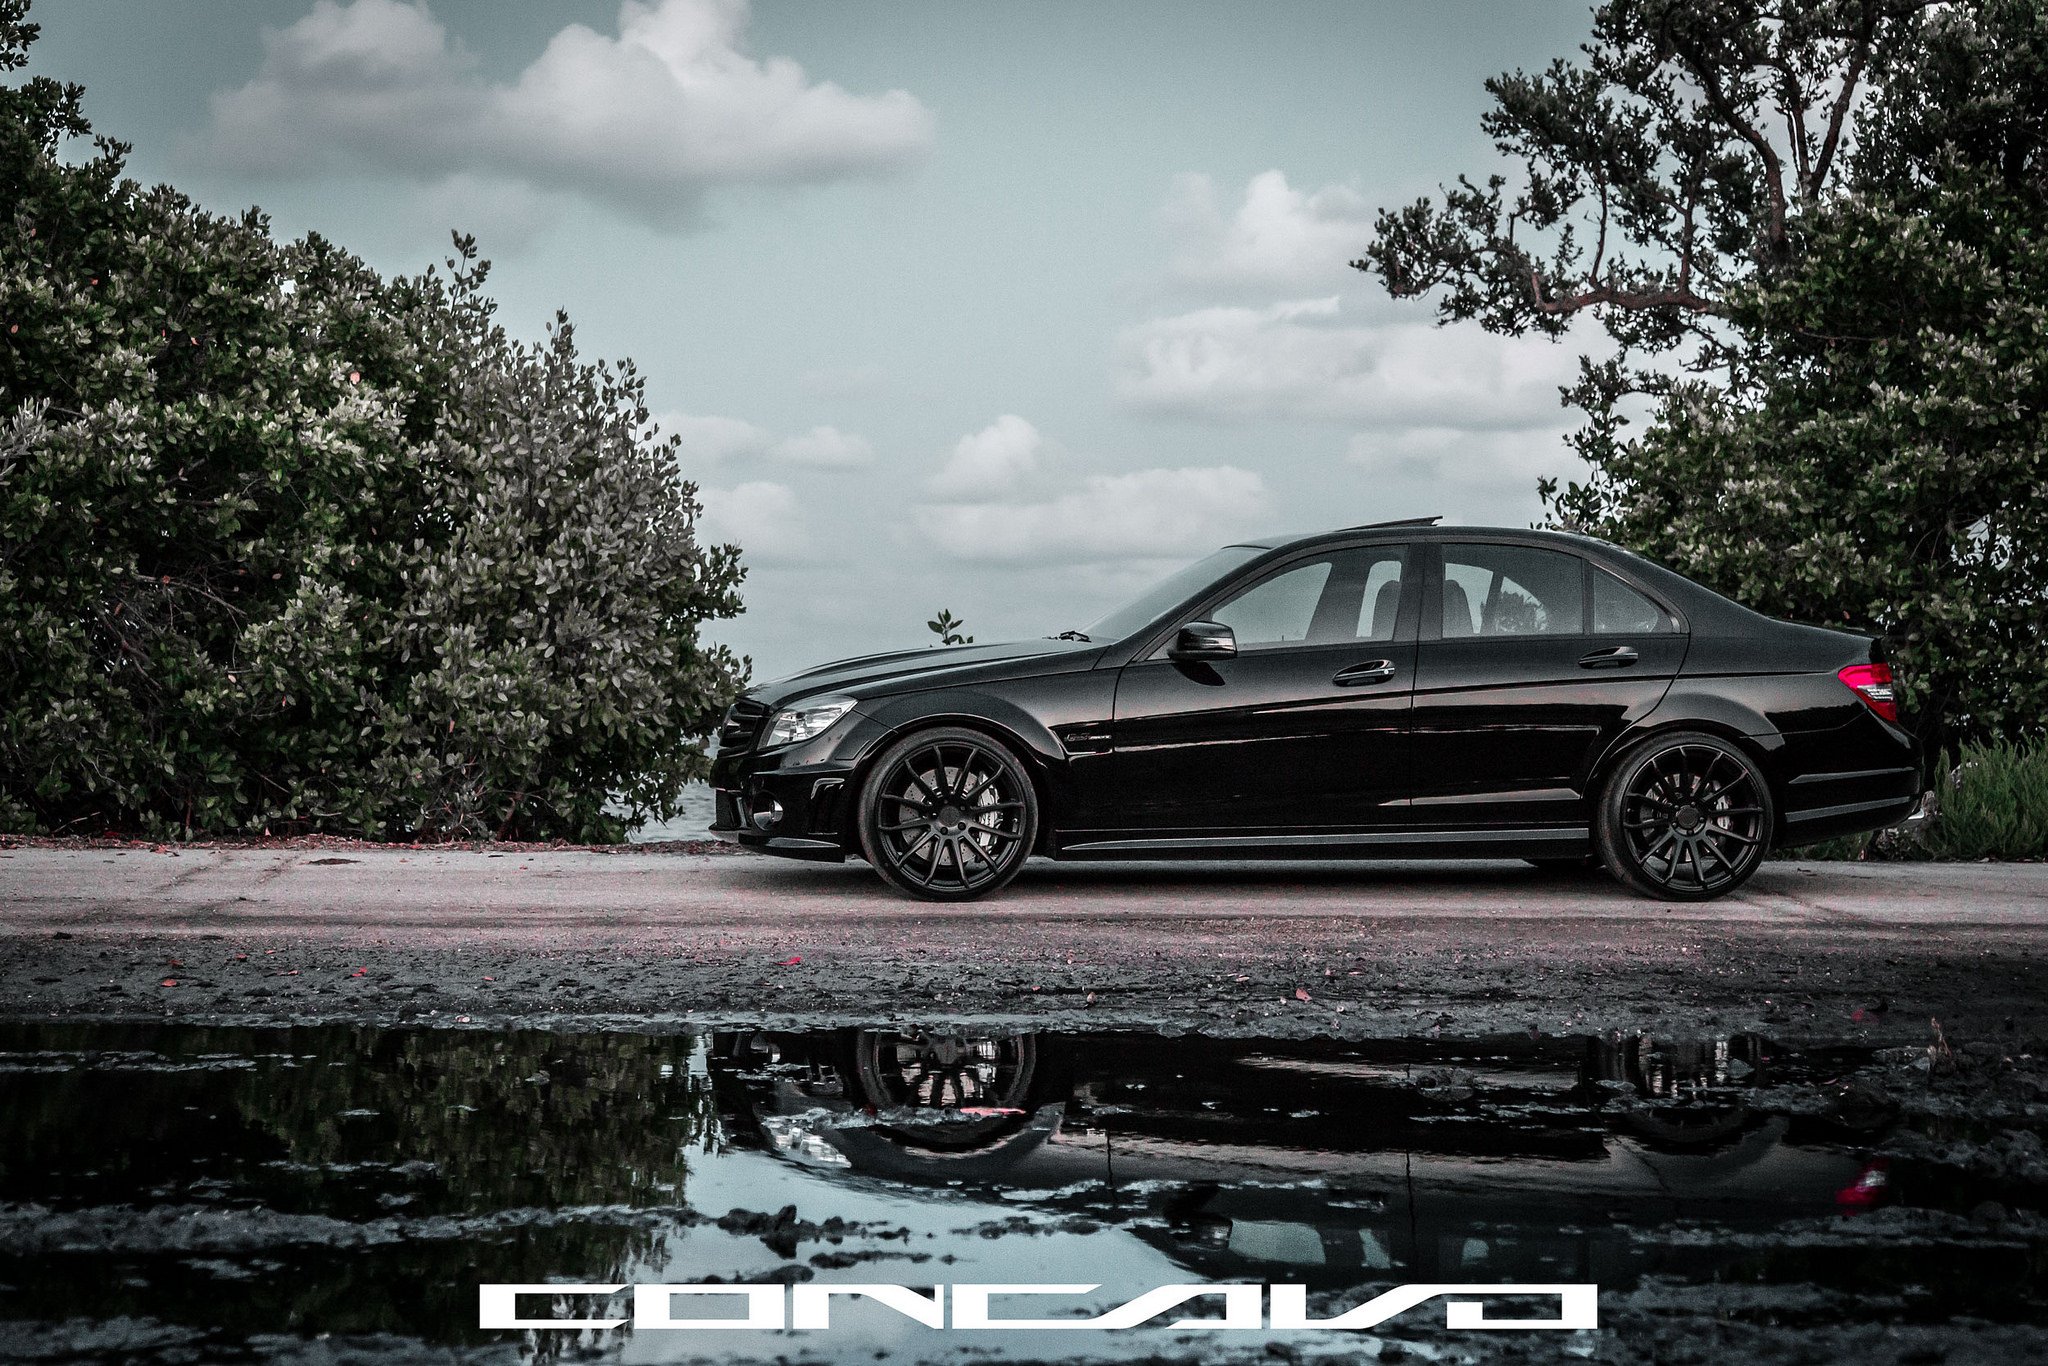 mercedes, Benz, C63, Amg, Tuning, Concavo, Wheels, Cars Wallpaper